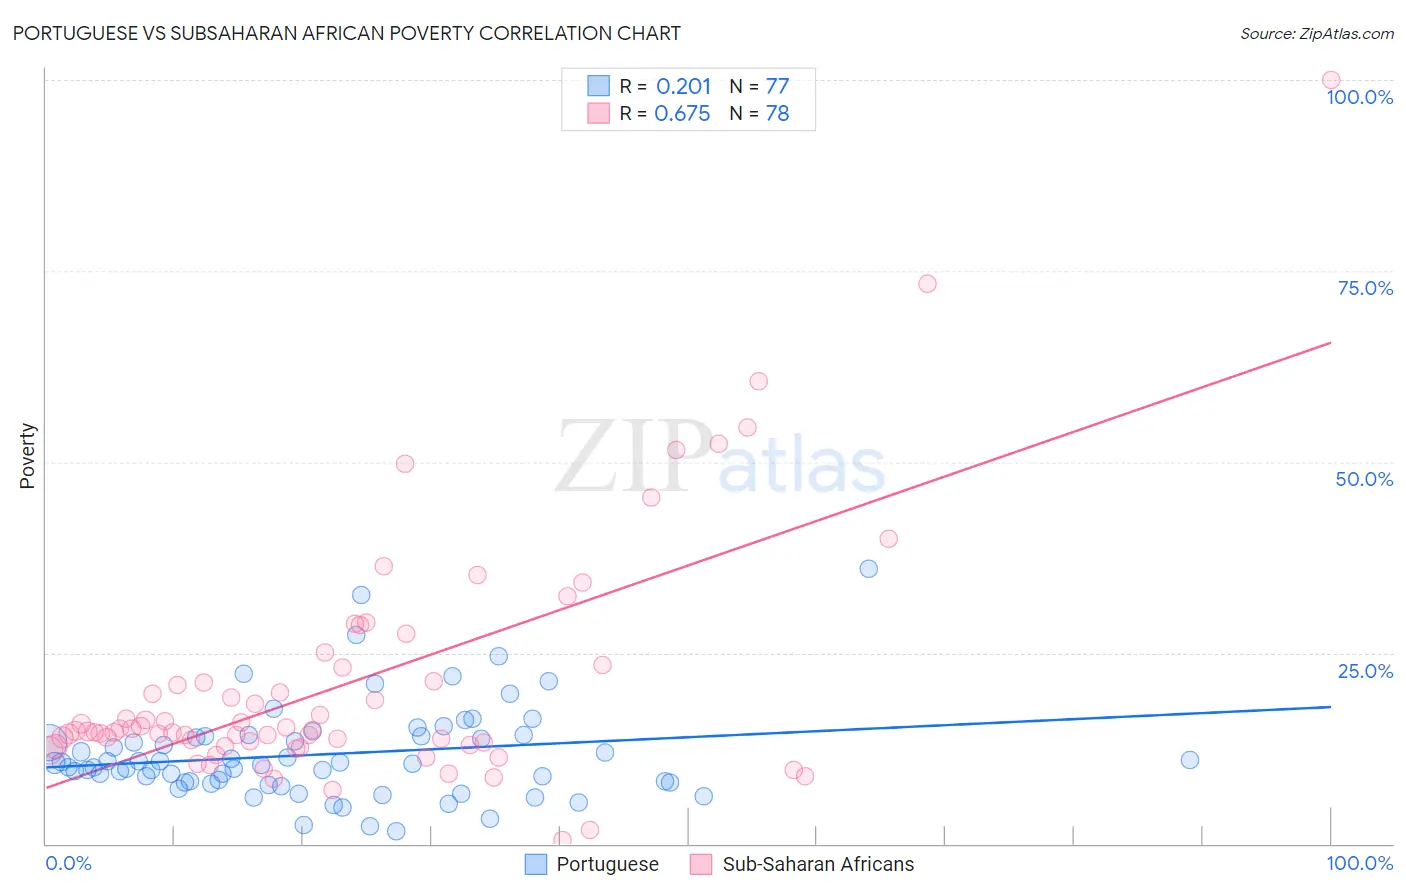 Portuguese vs Subsaharan African Poverty